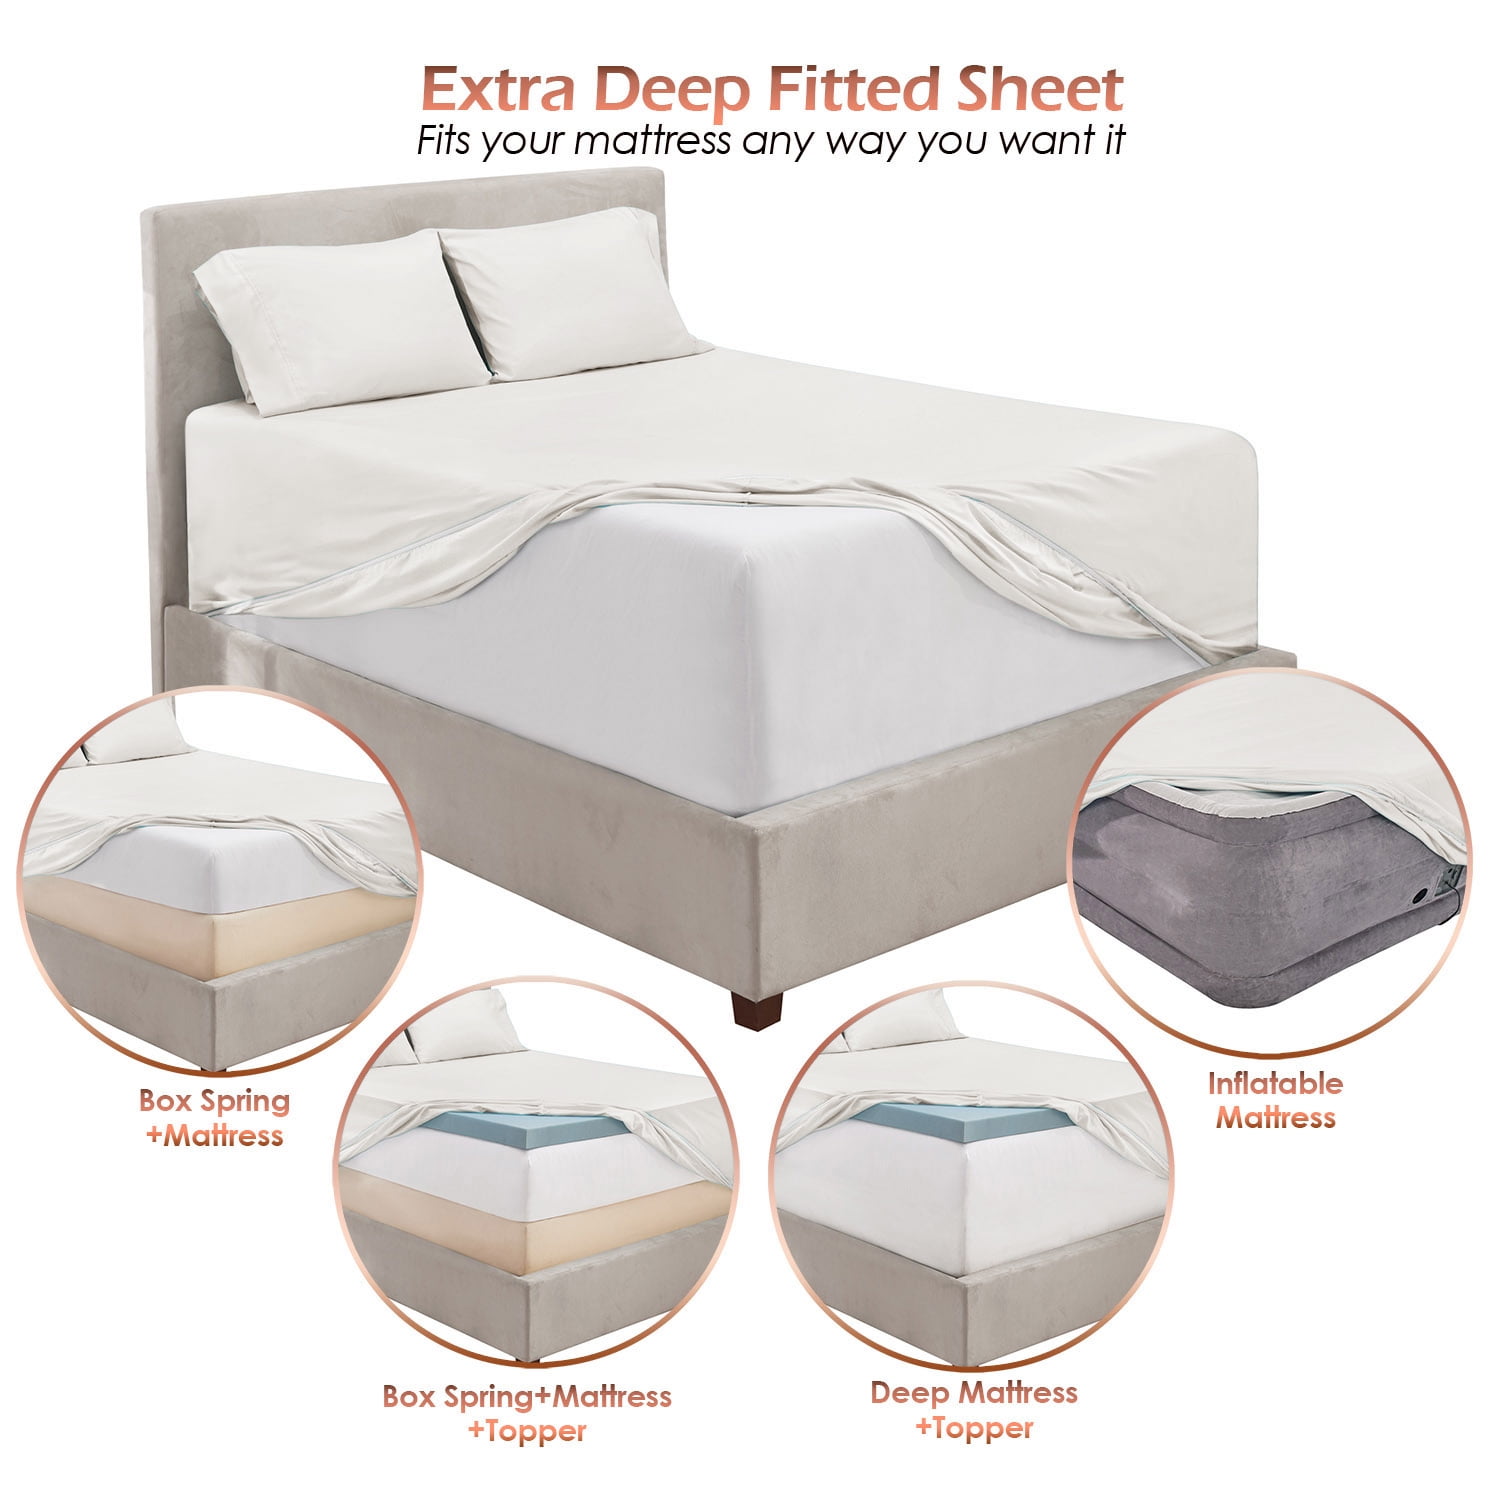 Details about   Educational Fitted Sheet Cover with All-Round Elastic Pocket in 4 Sizes